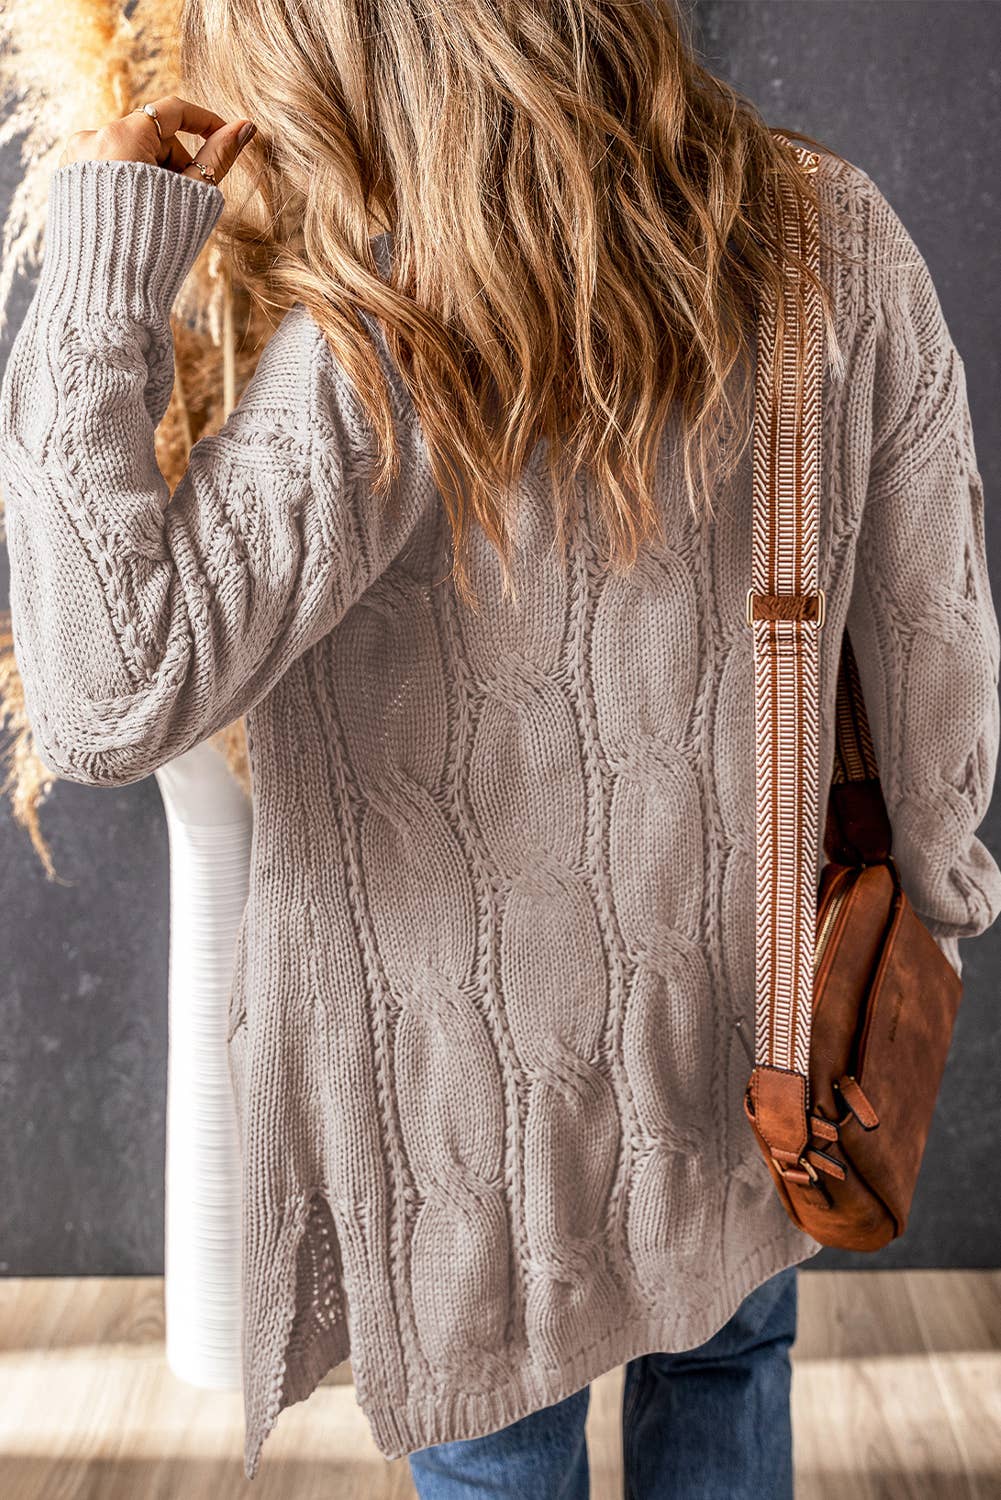 Textured Eyelet Ribbed Cable Knit Cardigan: M / casual / Brown